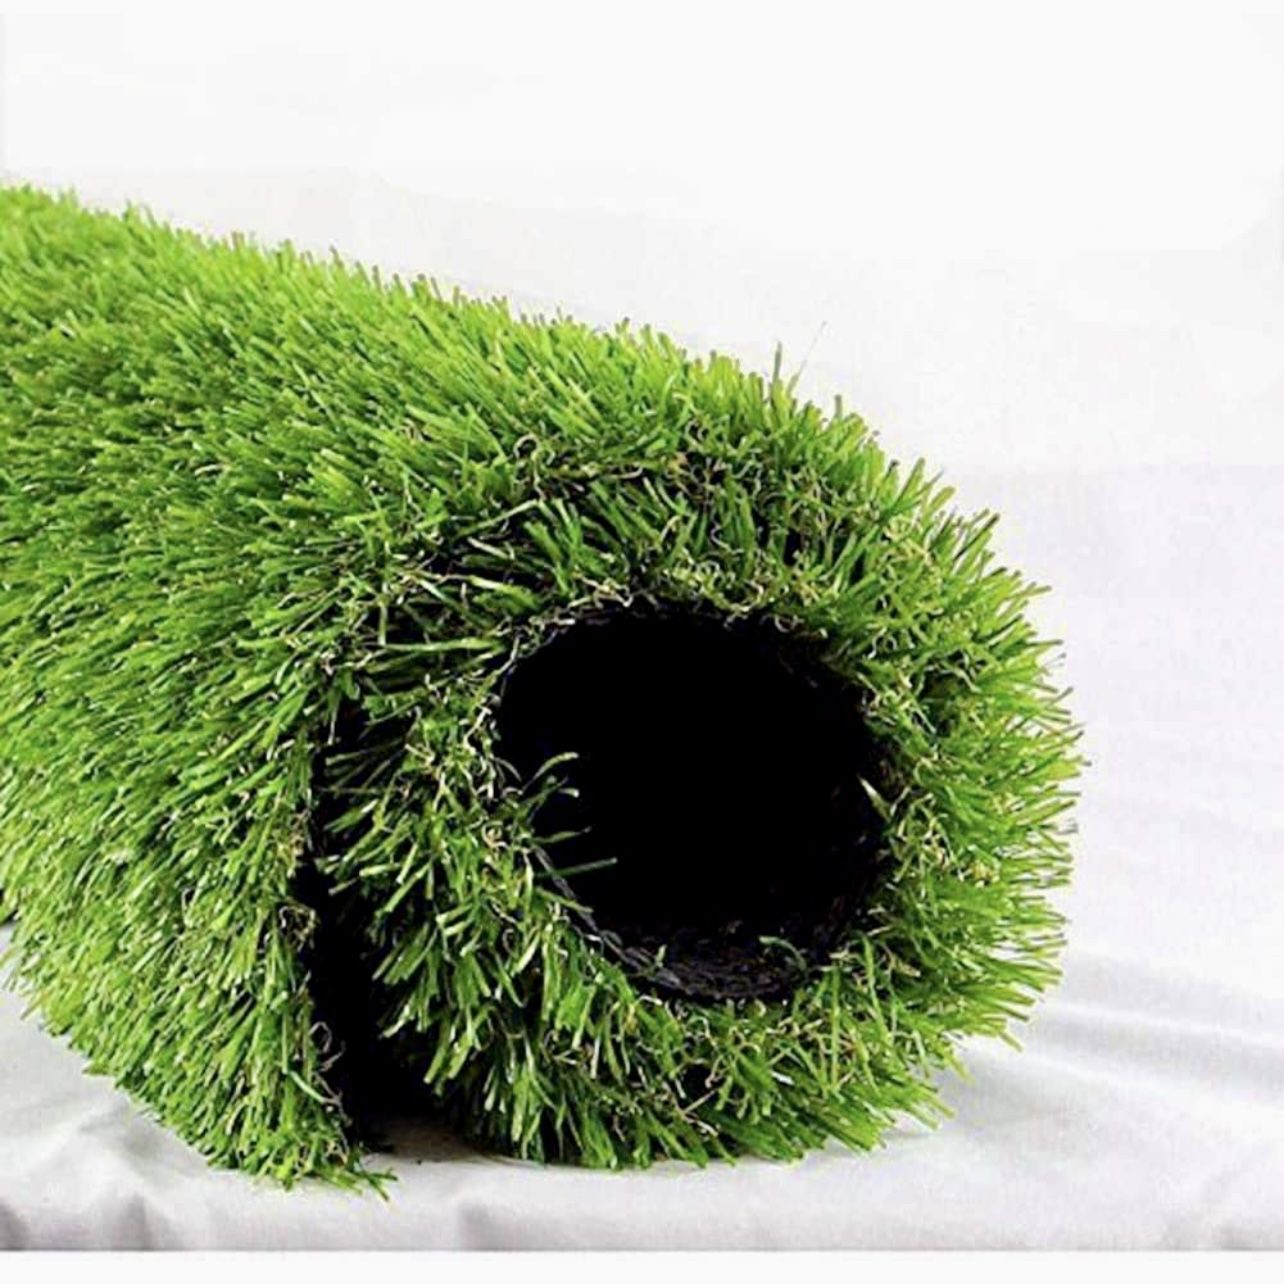 Artificial Grass Synthetic Thick Lawn Turf Carpet 3.3 FT x 5 FT (16.5 Square FT) -Perfect for Indoor/Outdoor Landscape